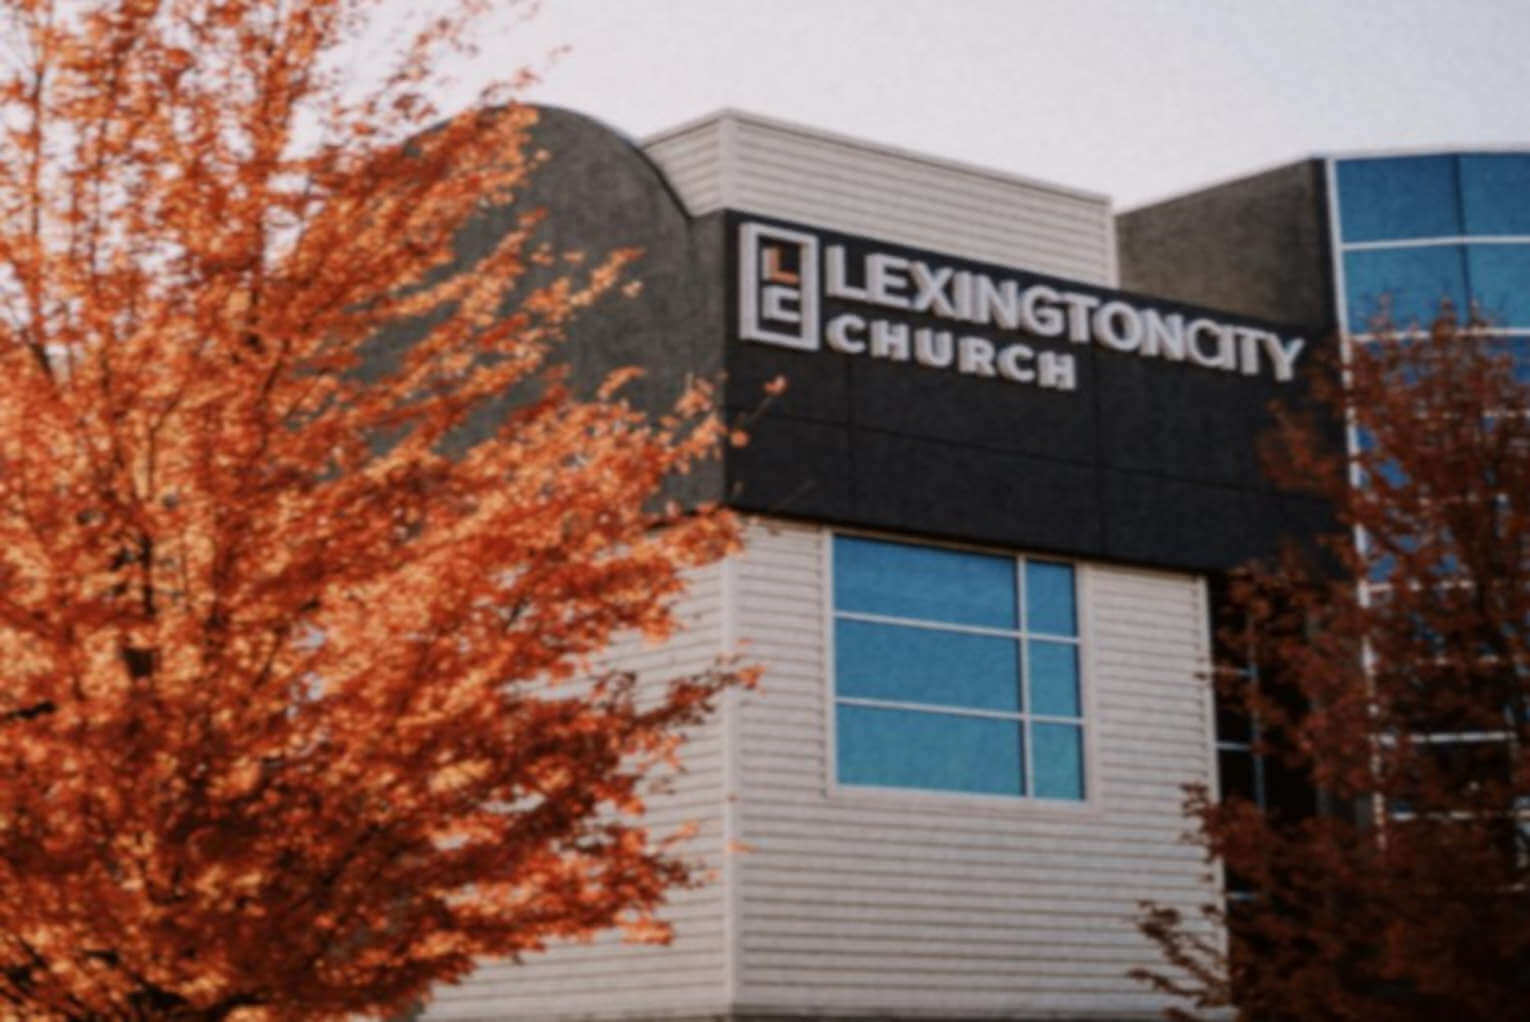 Sexual Abuse Scandal Forces Permanent Closure of Megachurch